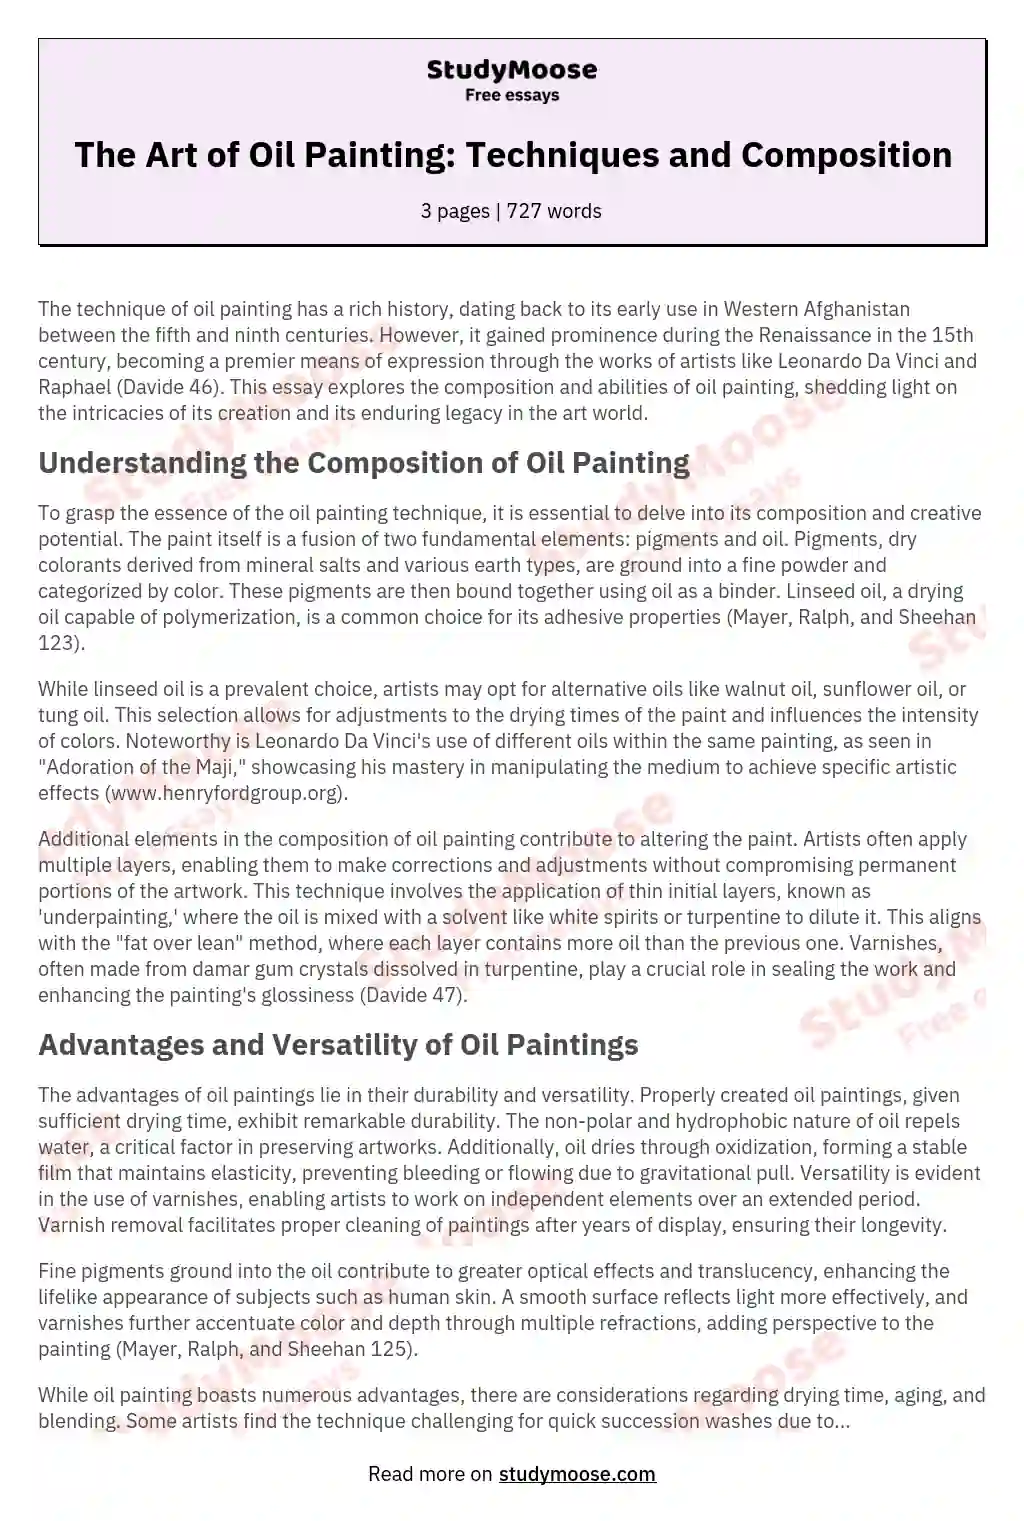 research paper about paintings